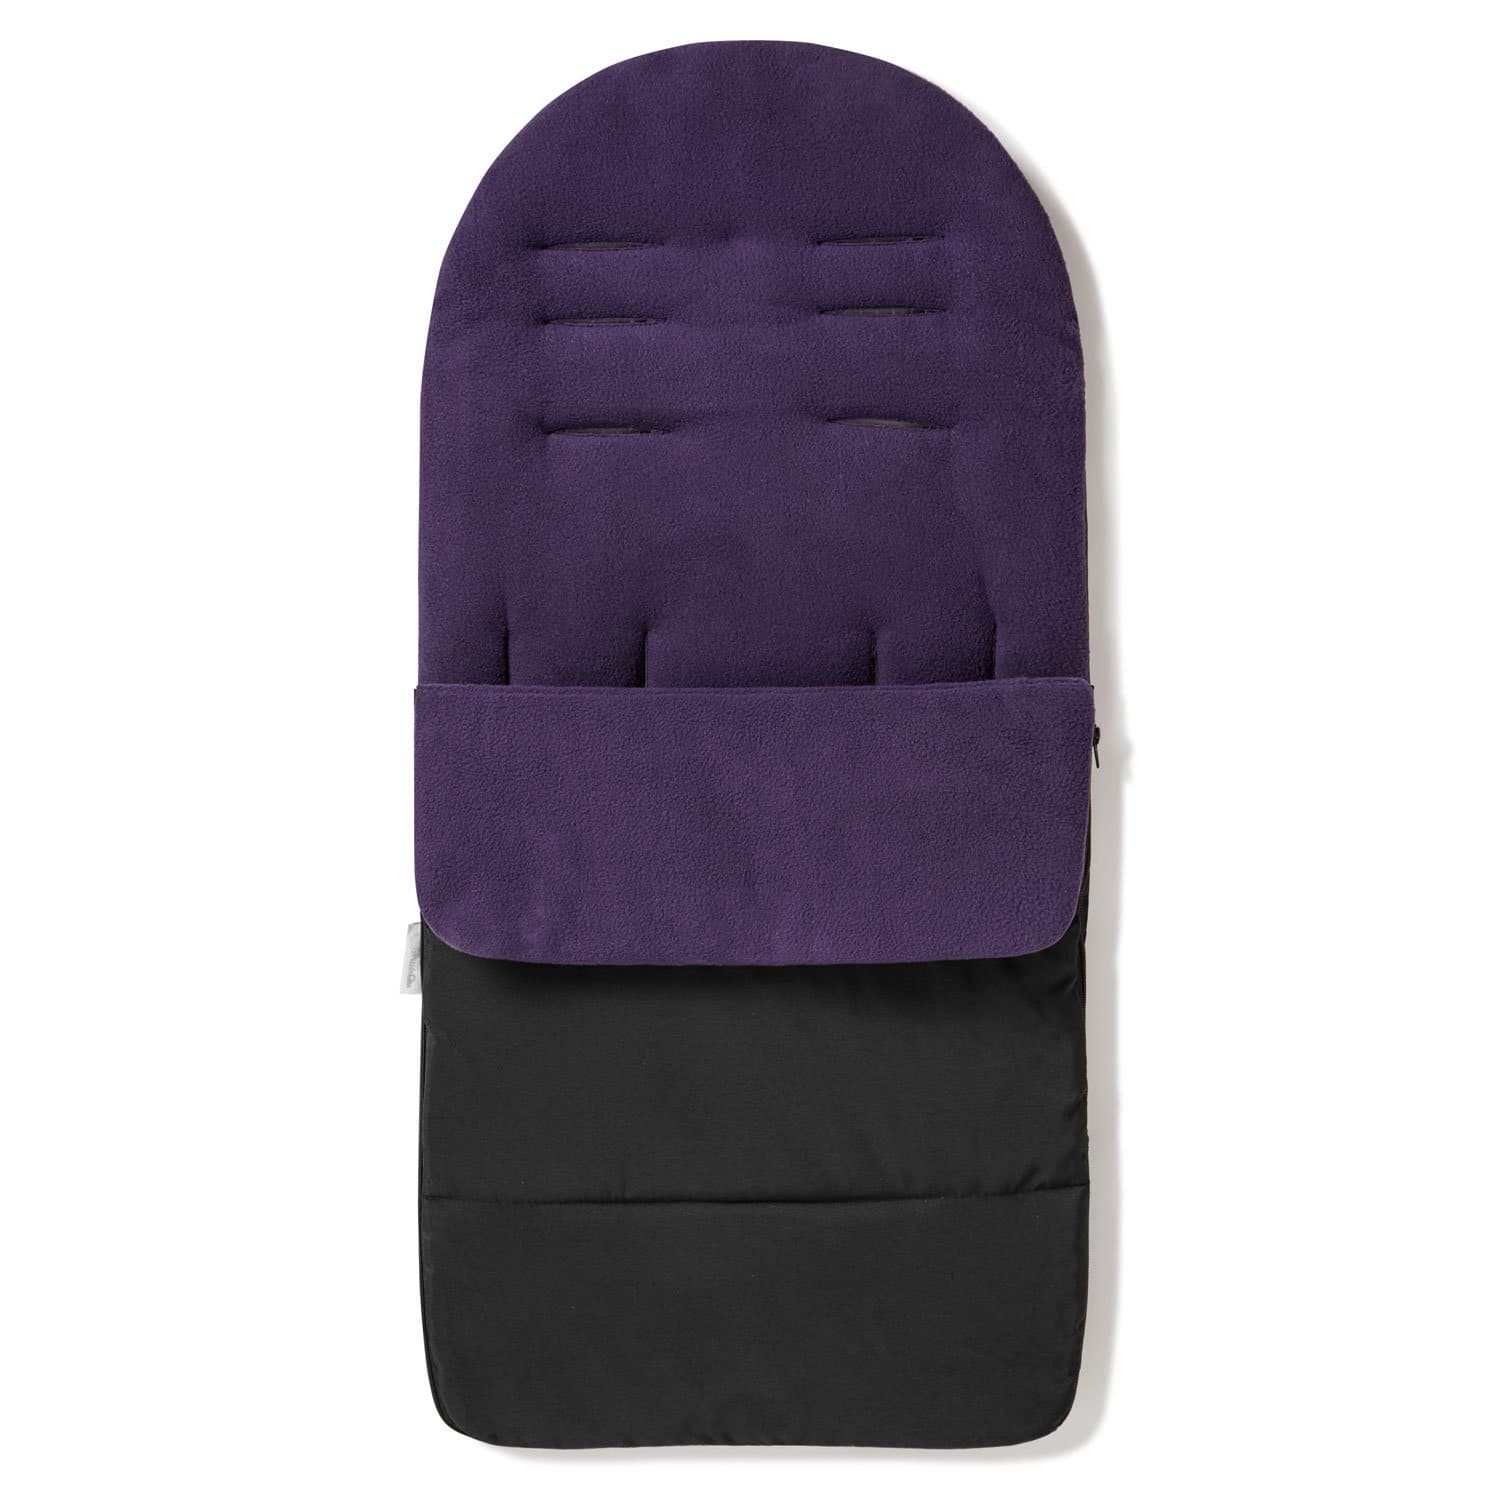 Premium Footmuff / Cosy Toes Compatible with BabyDan - Plum Purple / Fits All Models | For Your Little One